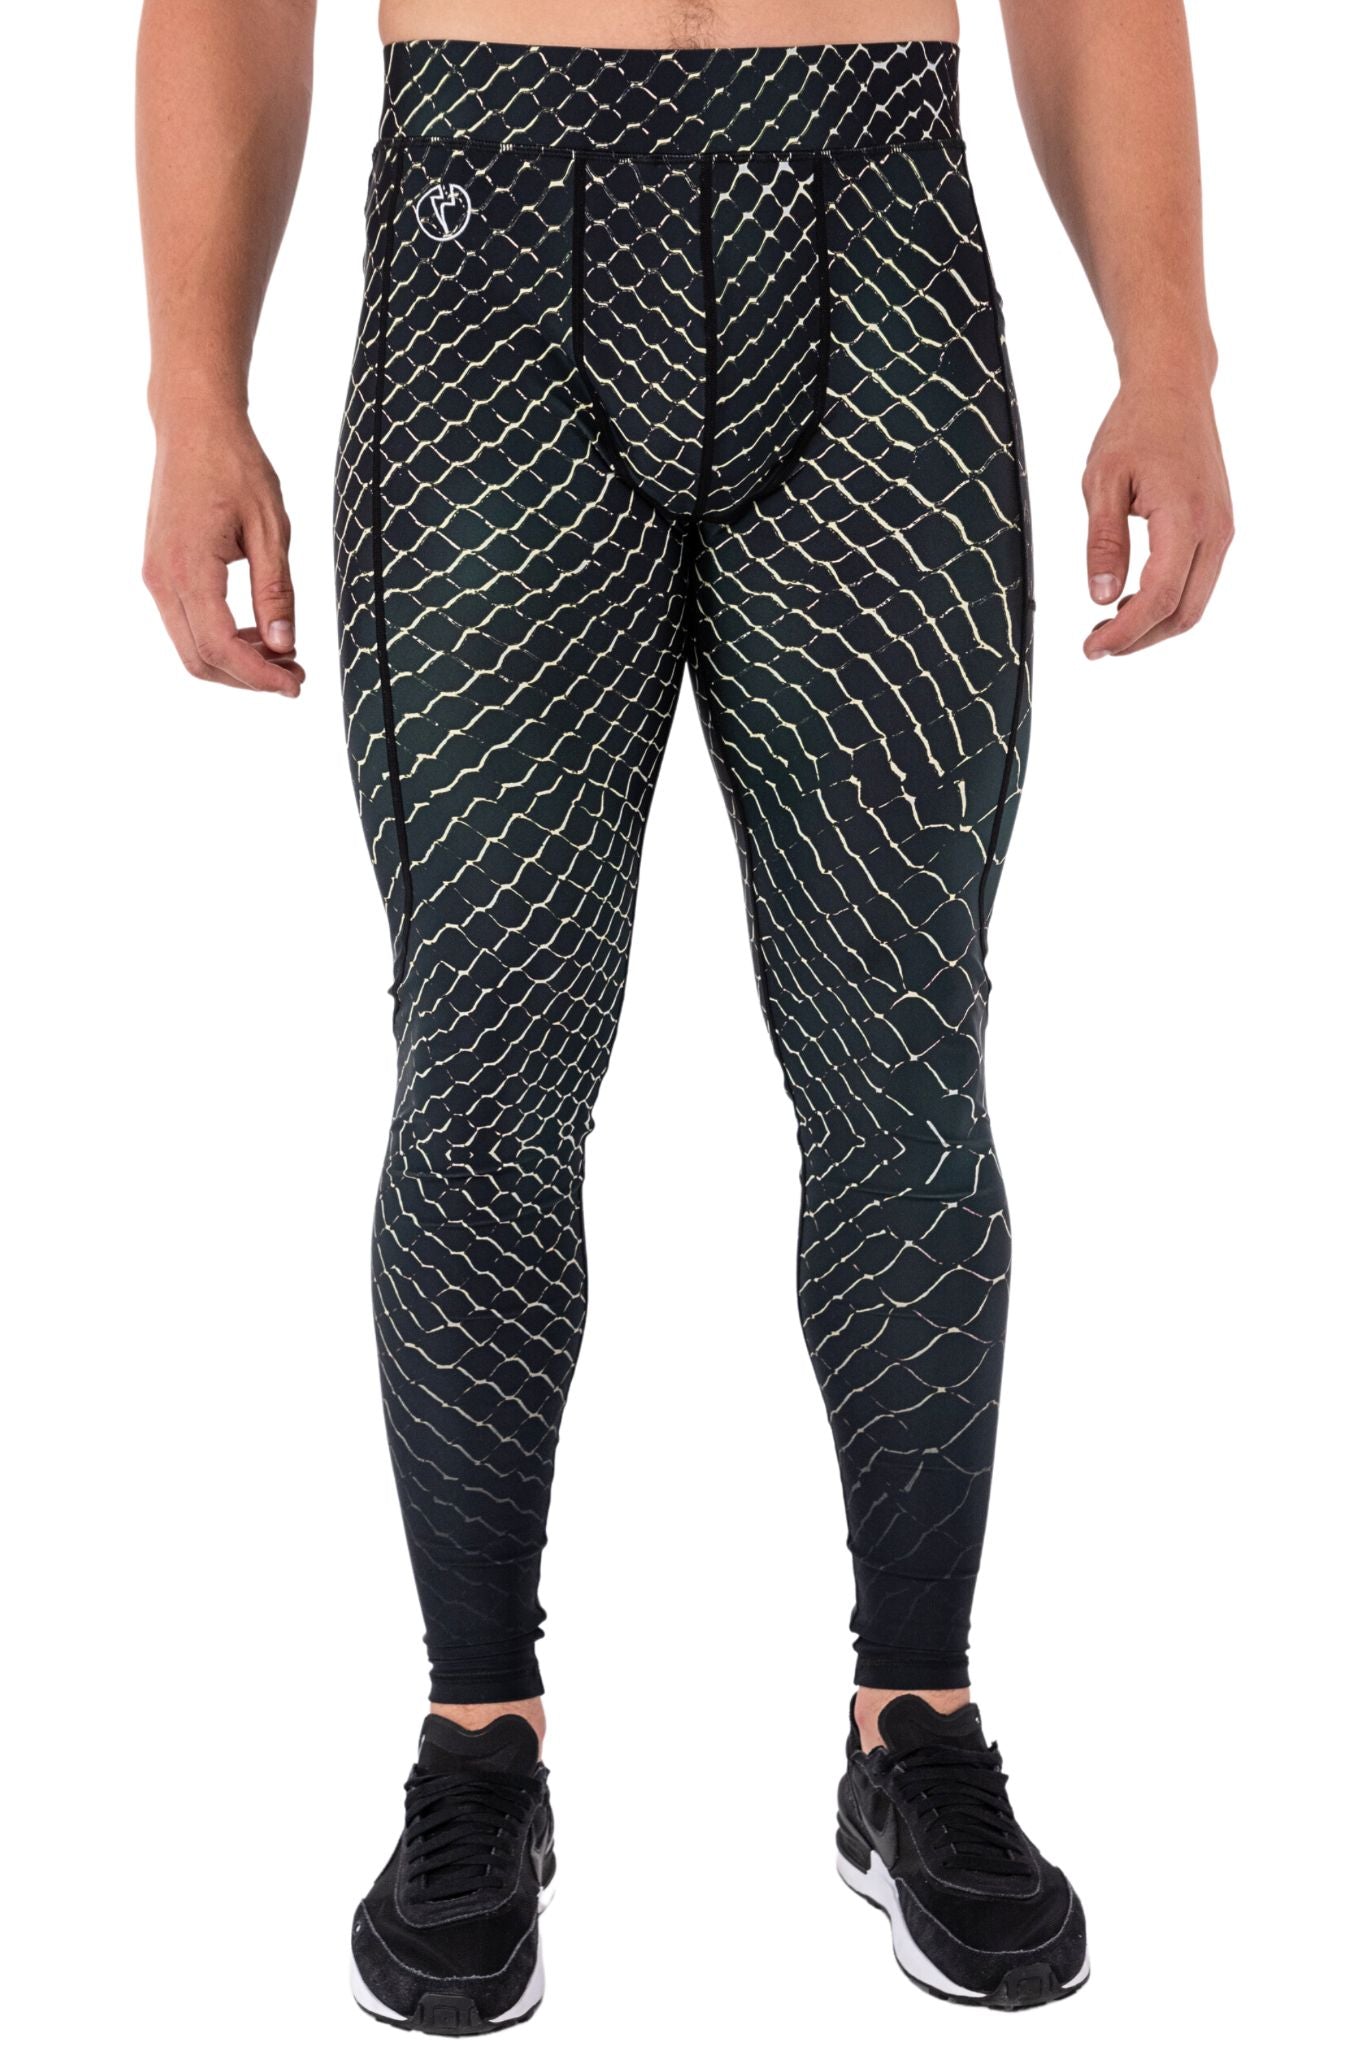 Taipan Meggings with Removable Crotch Pad - Kapow Meggings